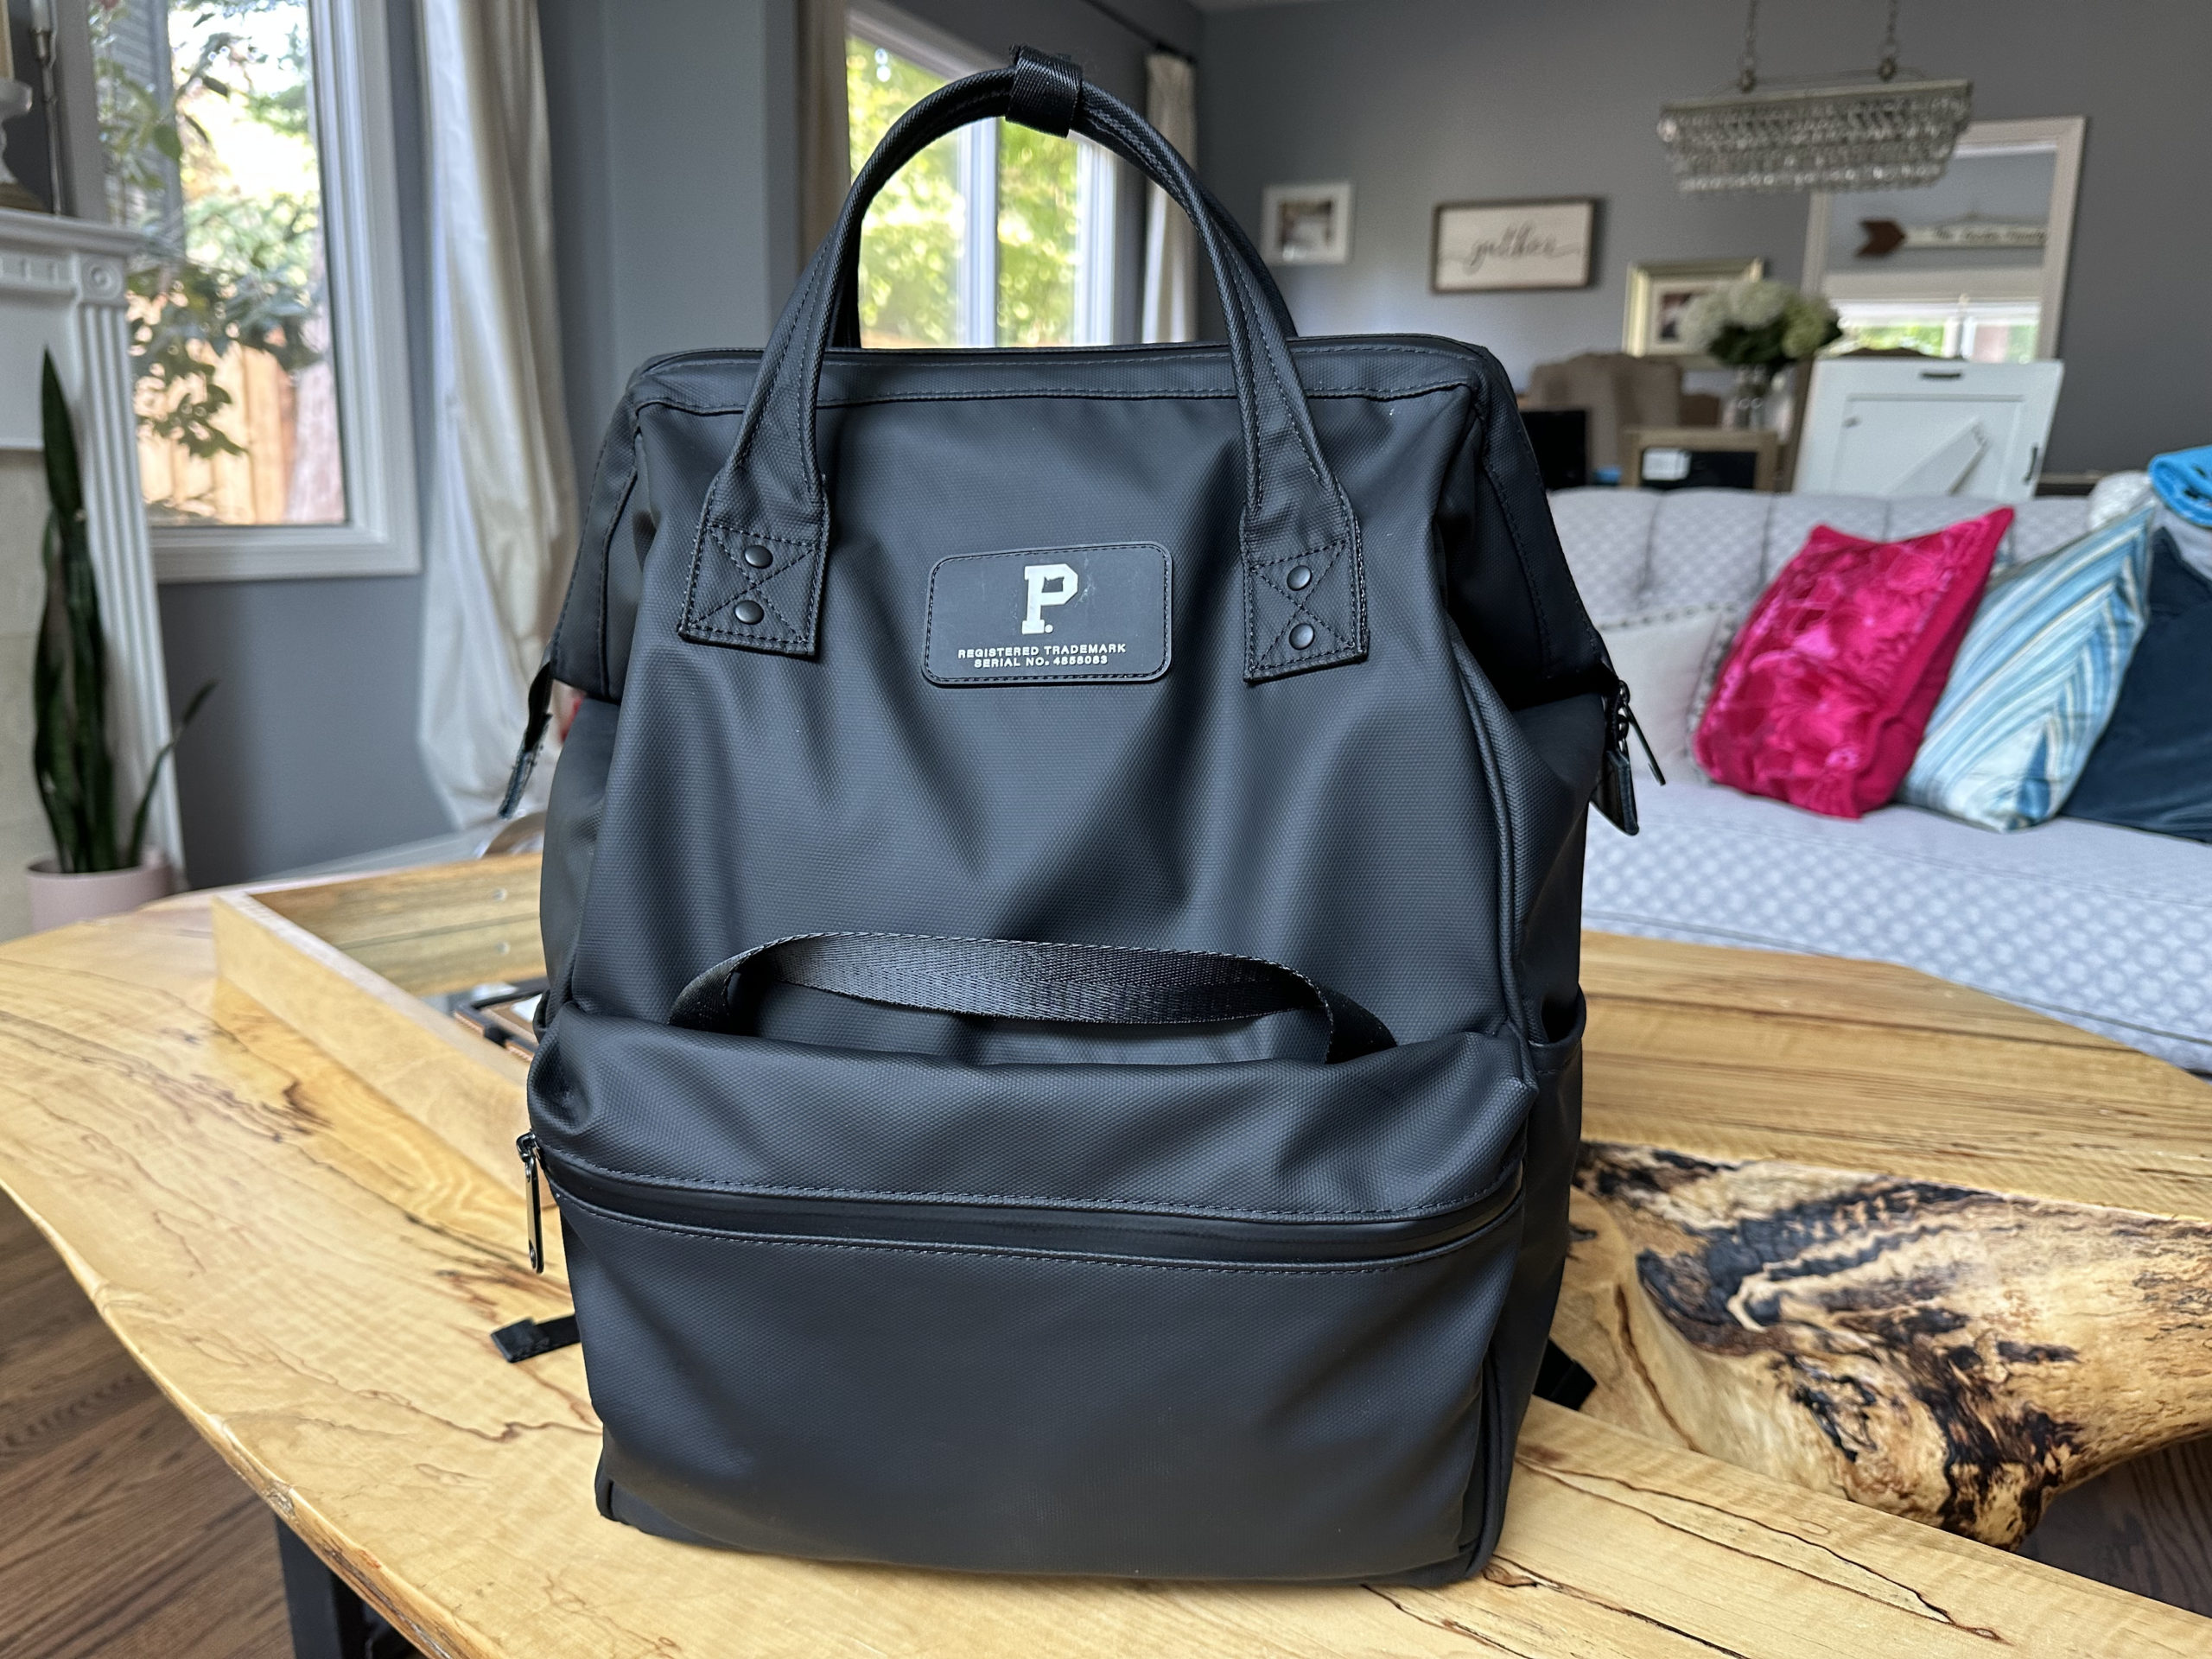 Portland Gear Backpack is perfect in (almost) every way